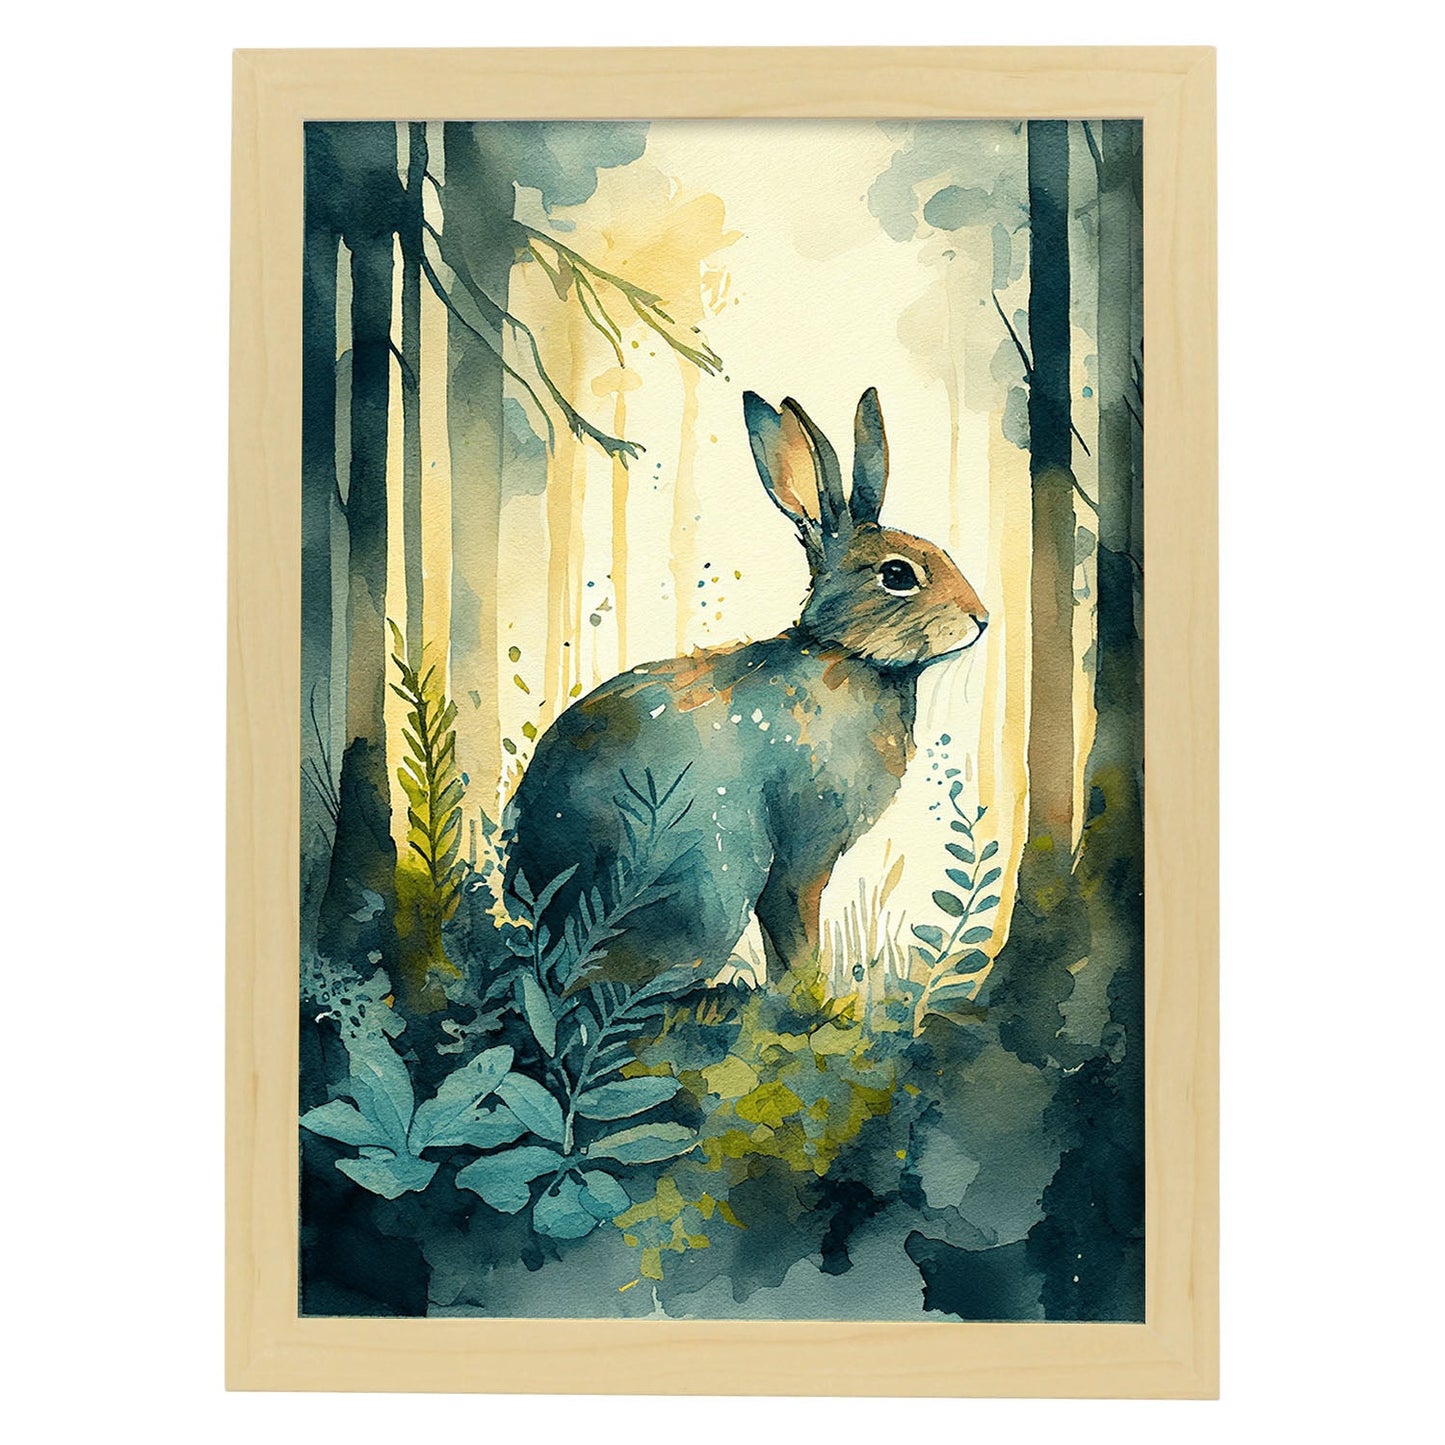 Nacnic Watercolor of Bunny in the forest_2. Aesthetic Wall Art Prints for Bedroom or Living Room Design.